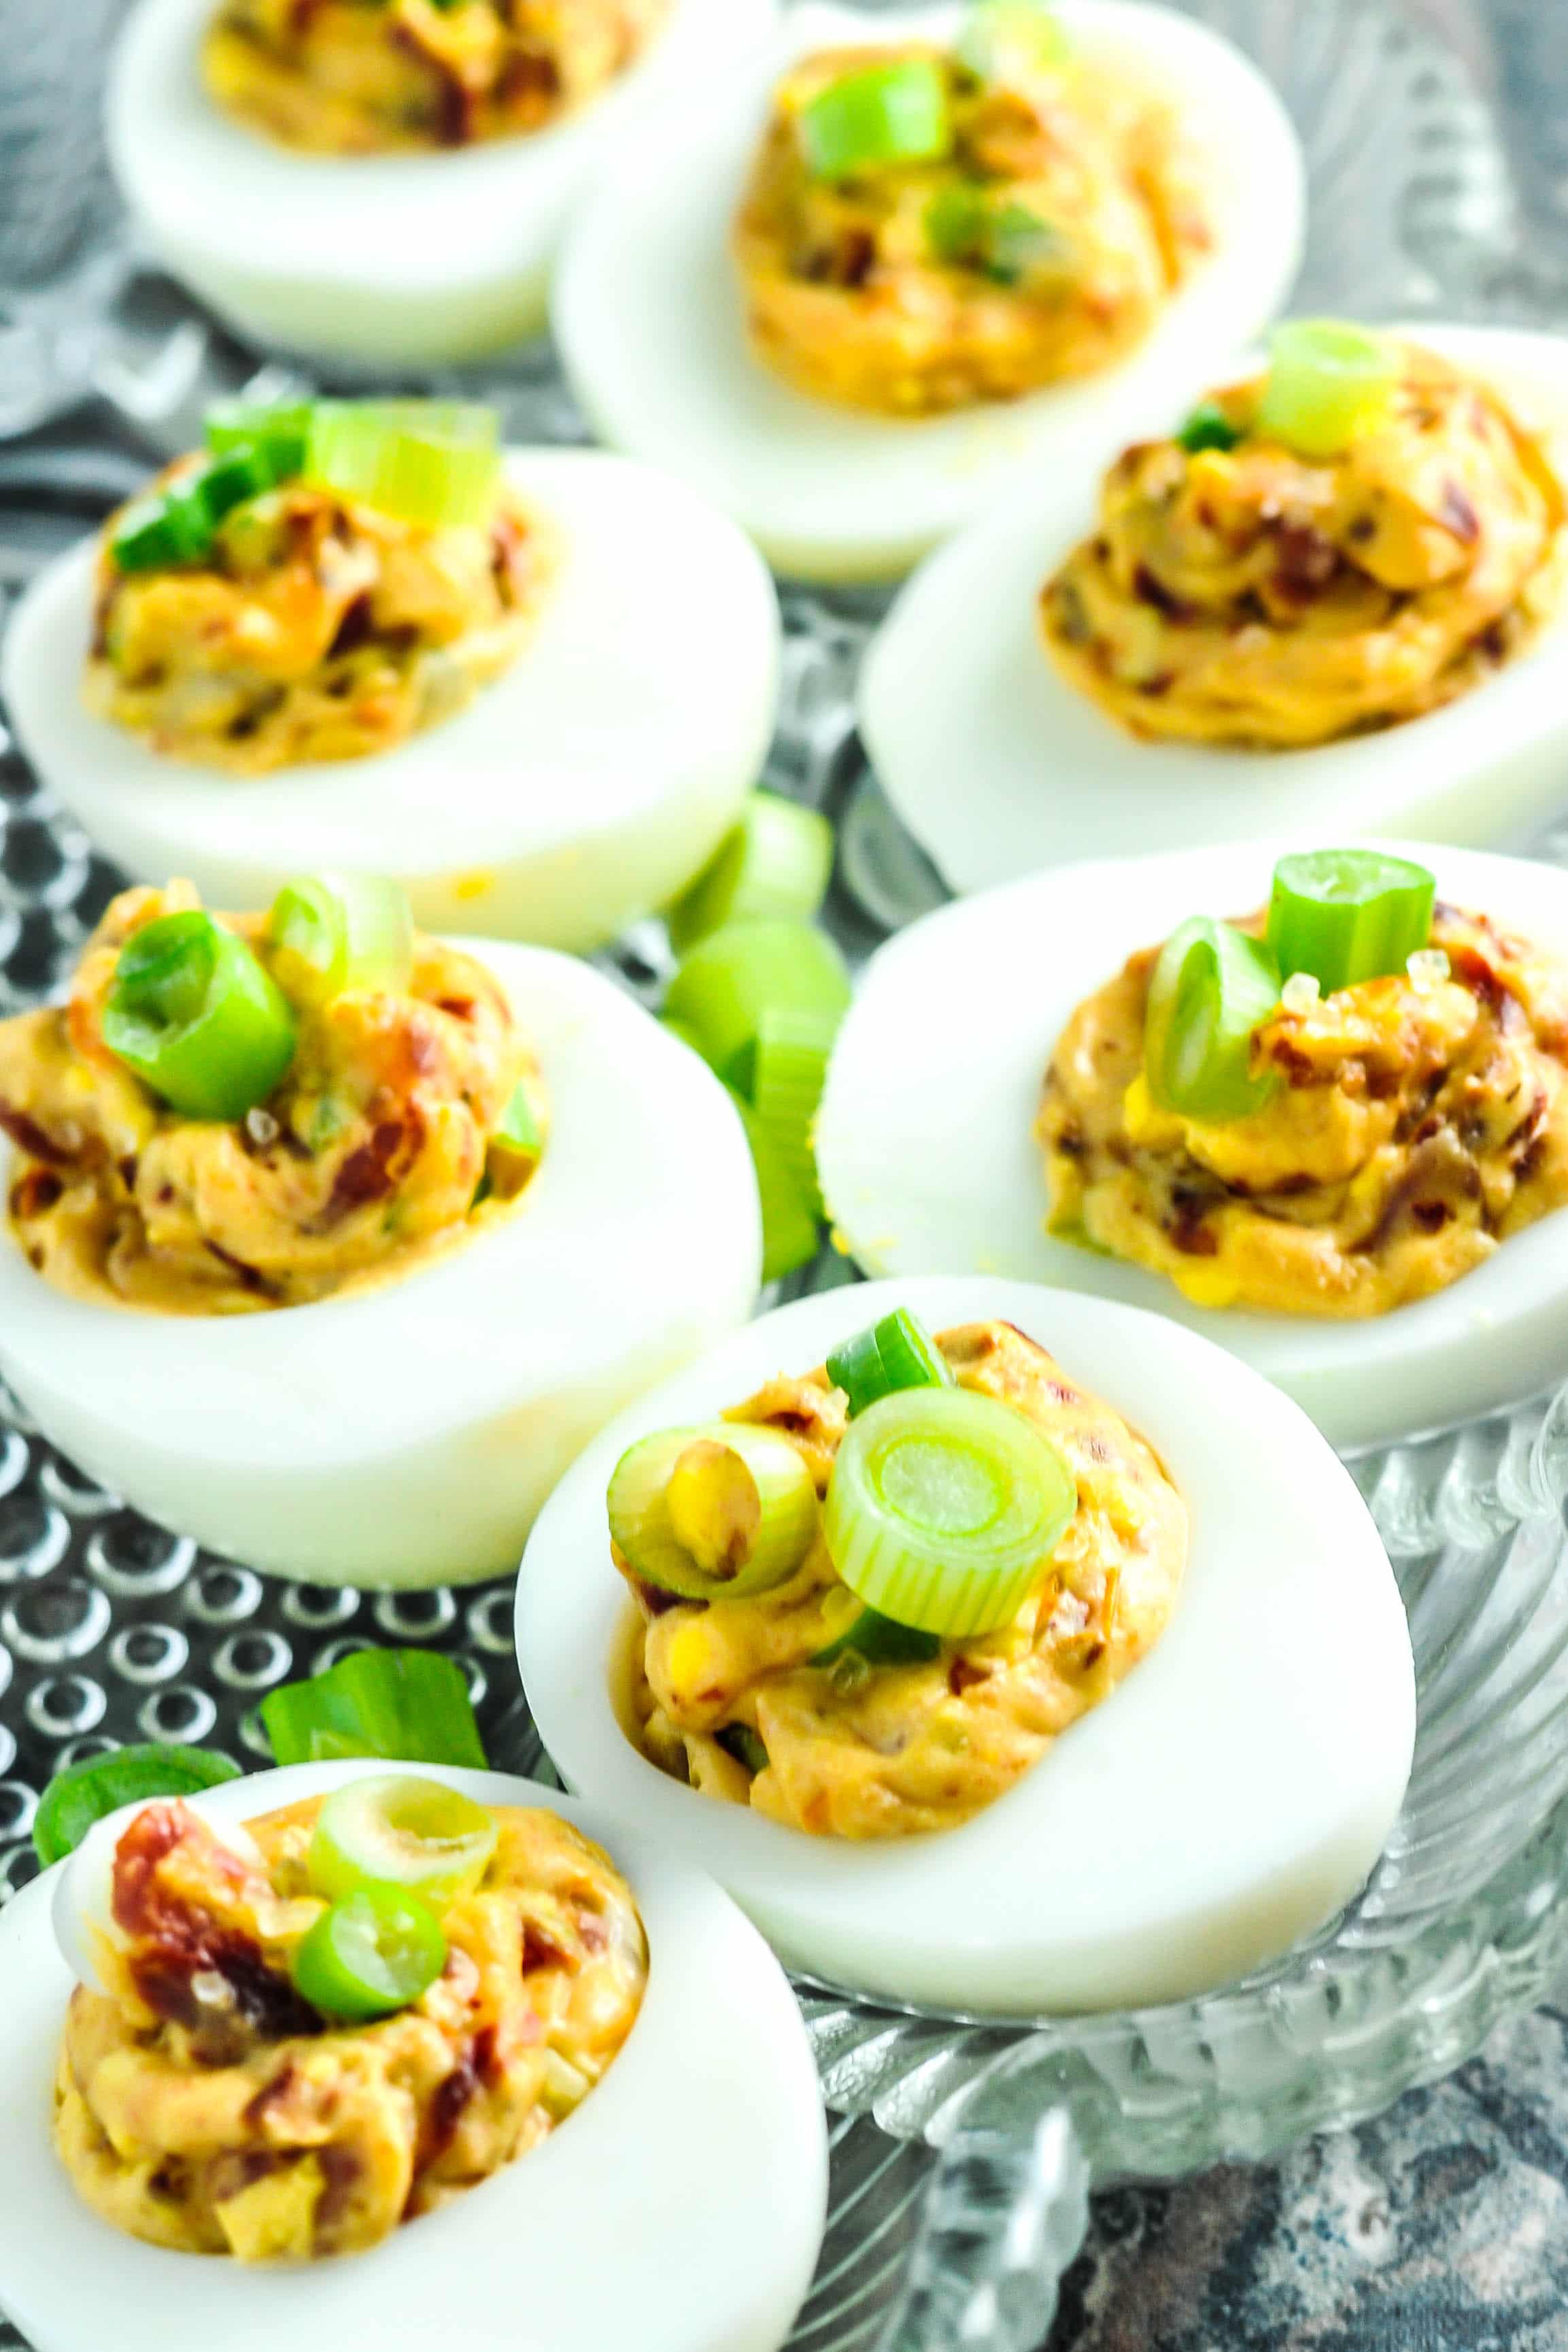 Keto Appetizers & Party Food Recipes - BLT Deviled Eggs Recipe #bacon #sundried #tomato #green onion #deviled #hardboiled #eggs #keto #lowcarb #ketogenic #atkins